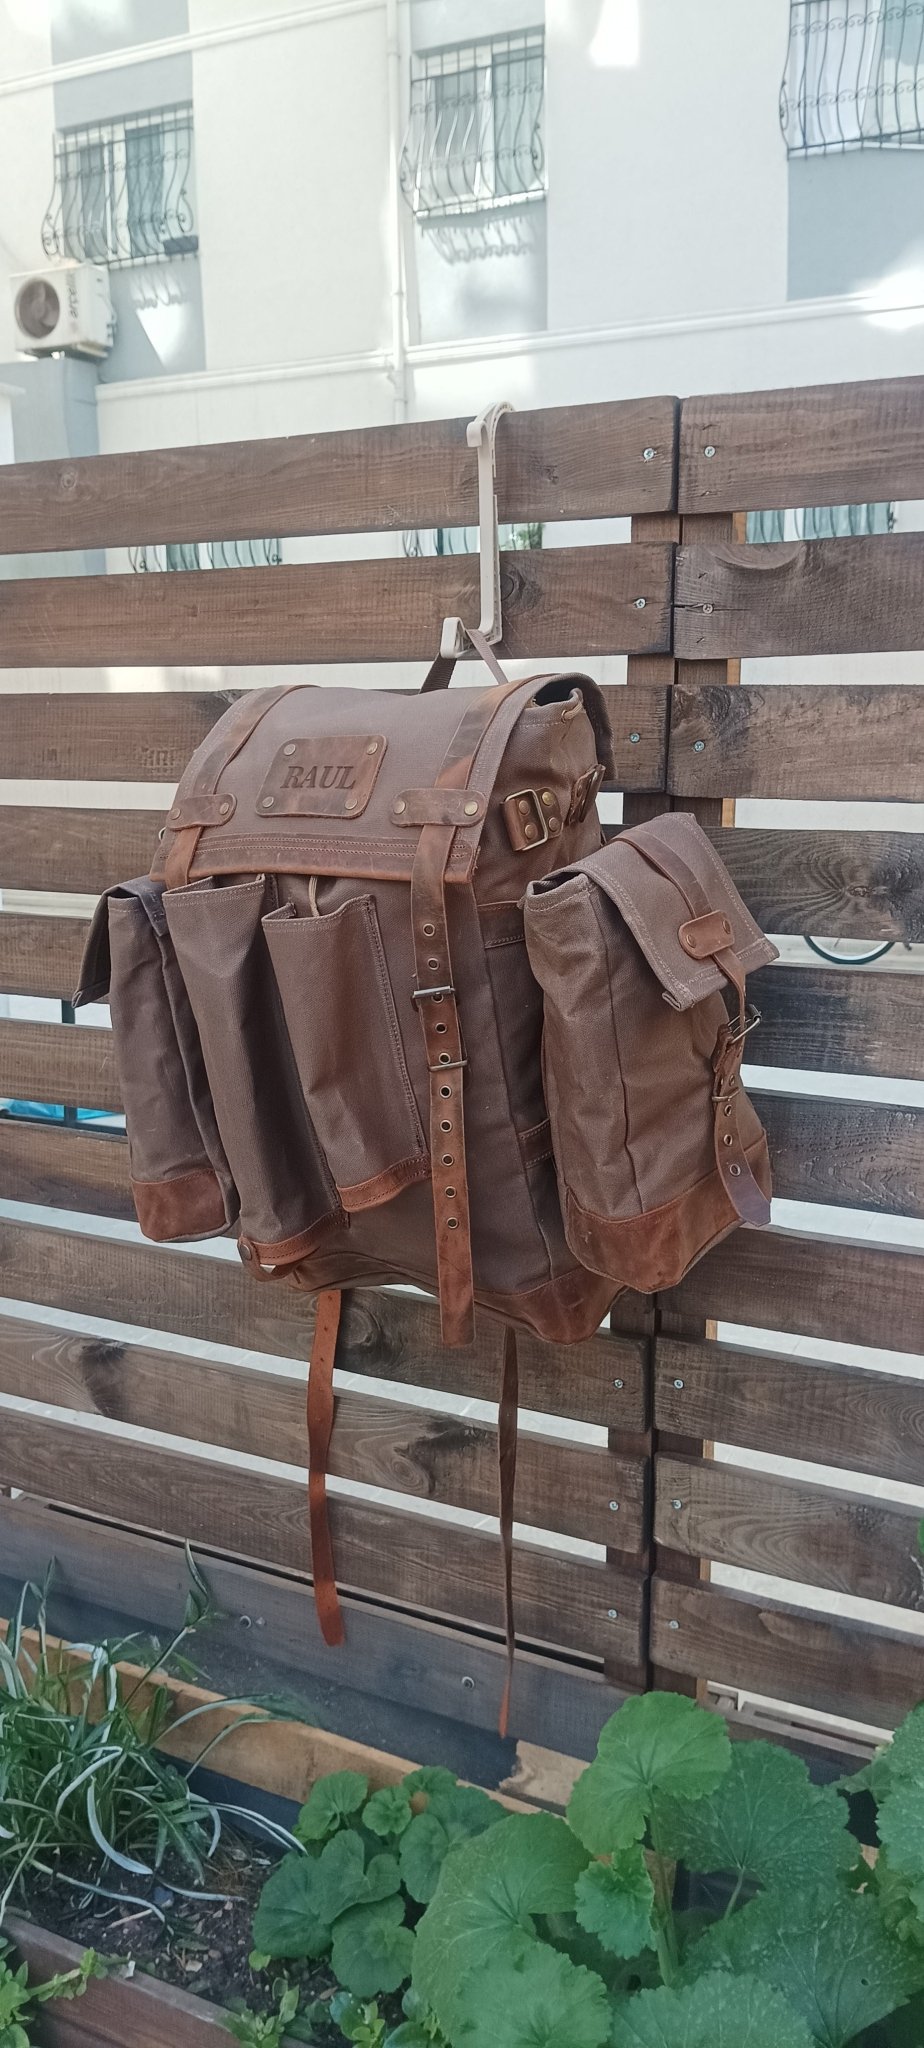 Only 20 Pieces With 2 Colour, Handmade  Waxed Canvas Backpack with leather for Travel, Camping | 50 Liter | Personalization bushcraft - camping - hiking backpack 99percenthandmade   